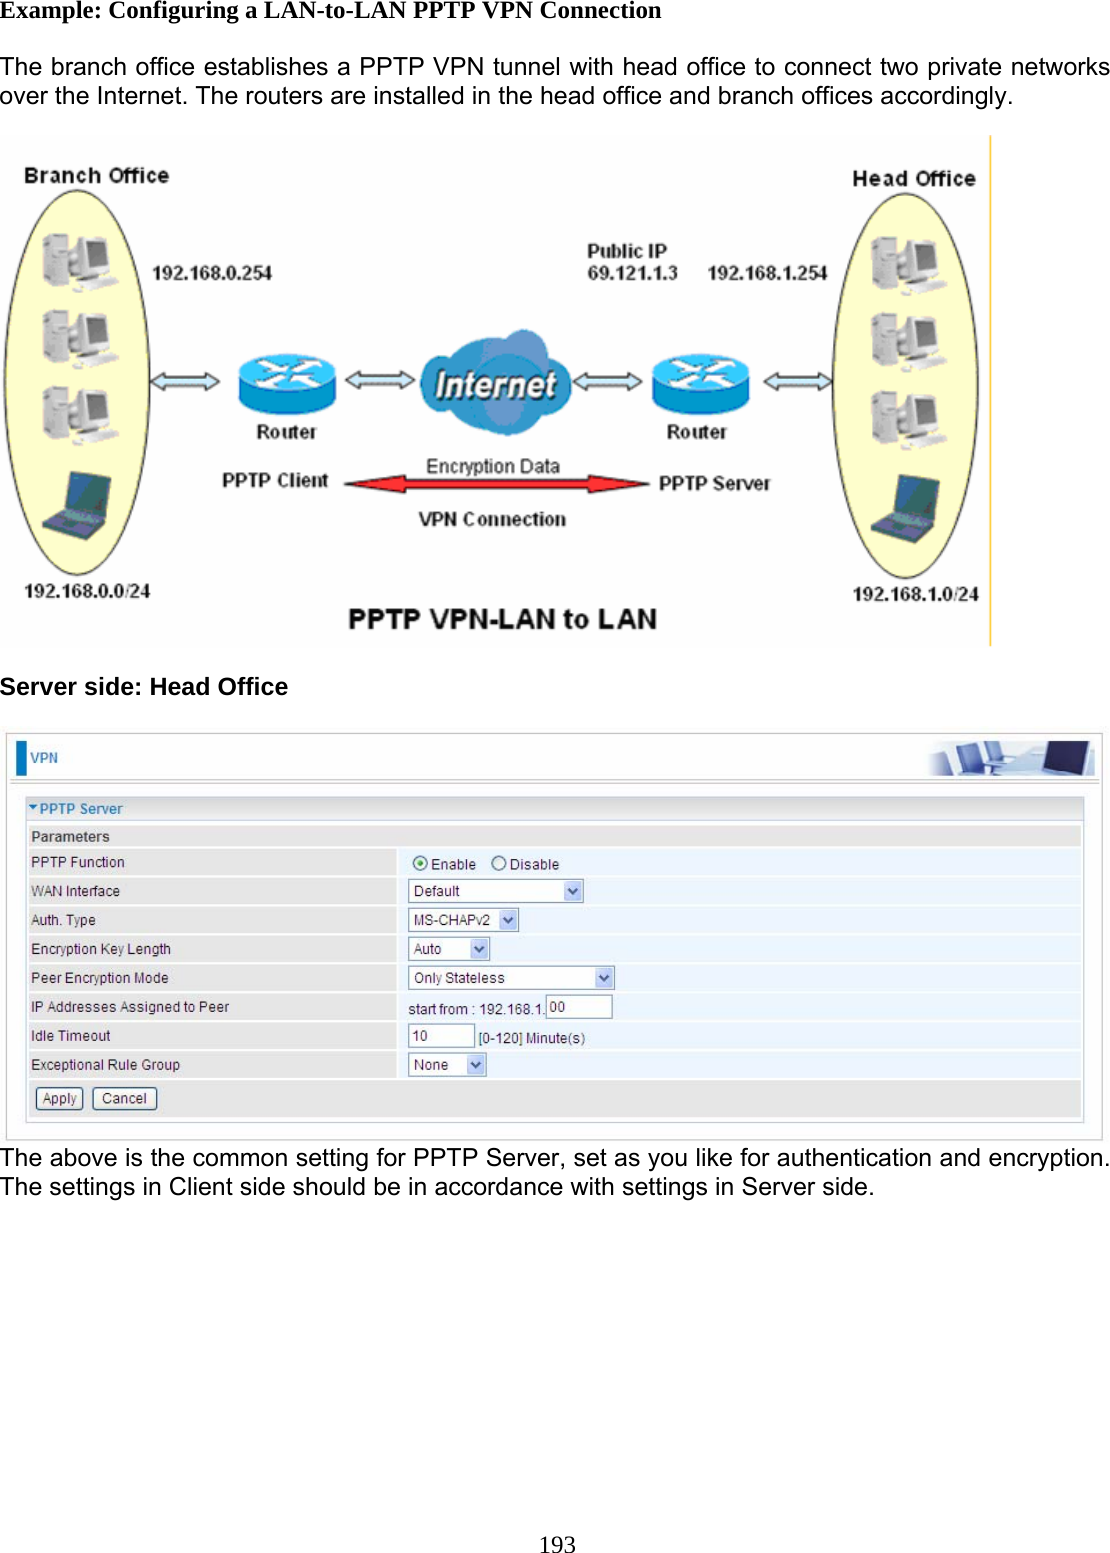 193 Example: Configuring a LAN-to-LAN PPTP VPN Connection  The branch office establishes a PPTP VPN tunnel with head office to connect two private networks over the Internet. The routers are installed in the head office and branch offices accordingly.    Server side: Head Office   The above is the common setting for PPTP Server, set as you like for authentication and encryption. The settings in Client side should be in accordance with settings in Server side.         